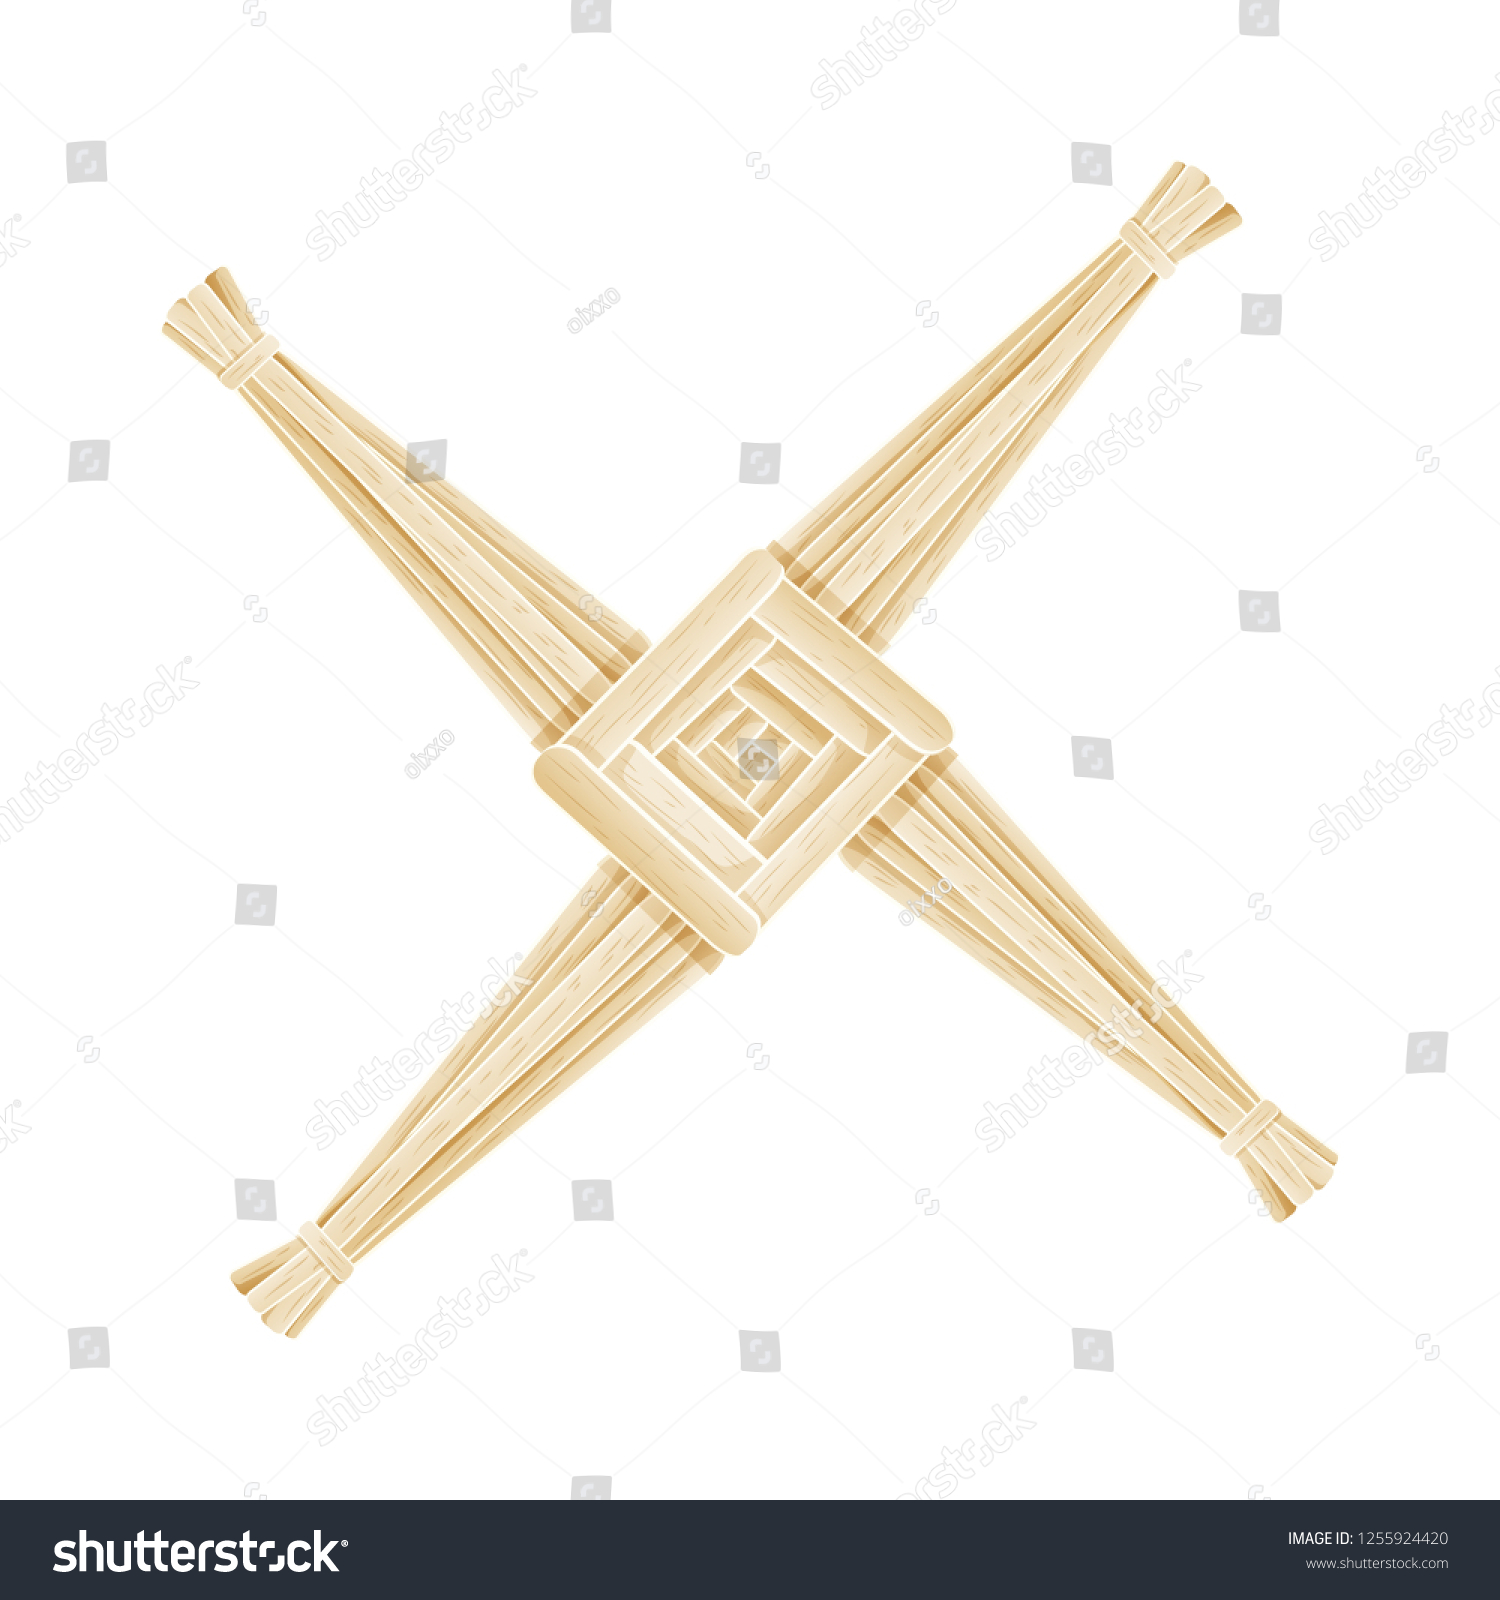 SVG of Brigid's Cross made of straw. Wiccan pagan symbol isolated element svg